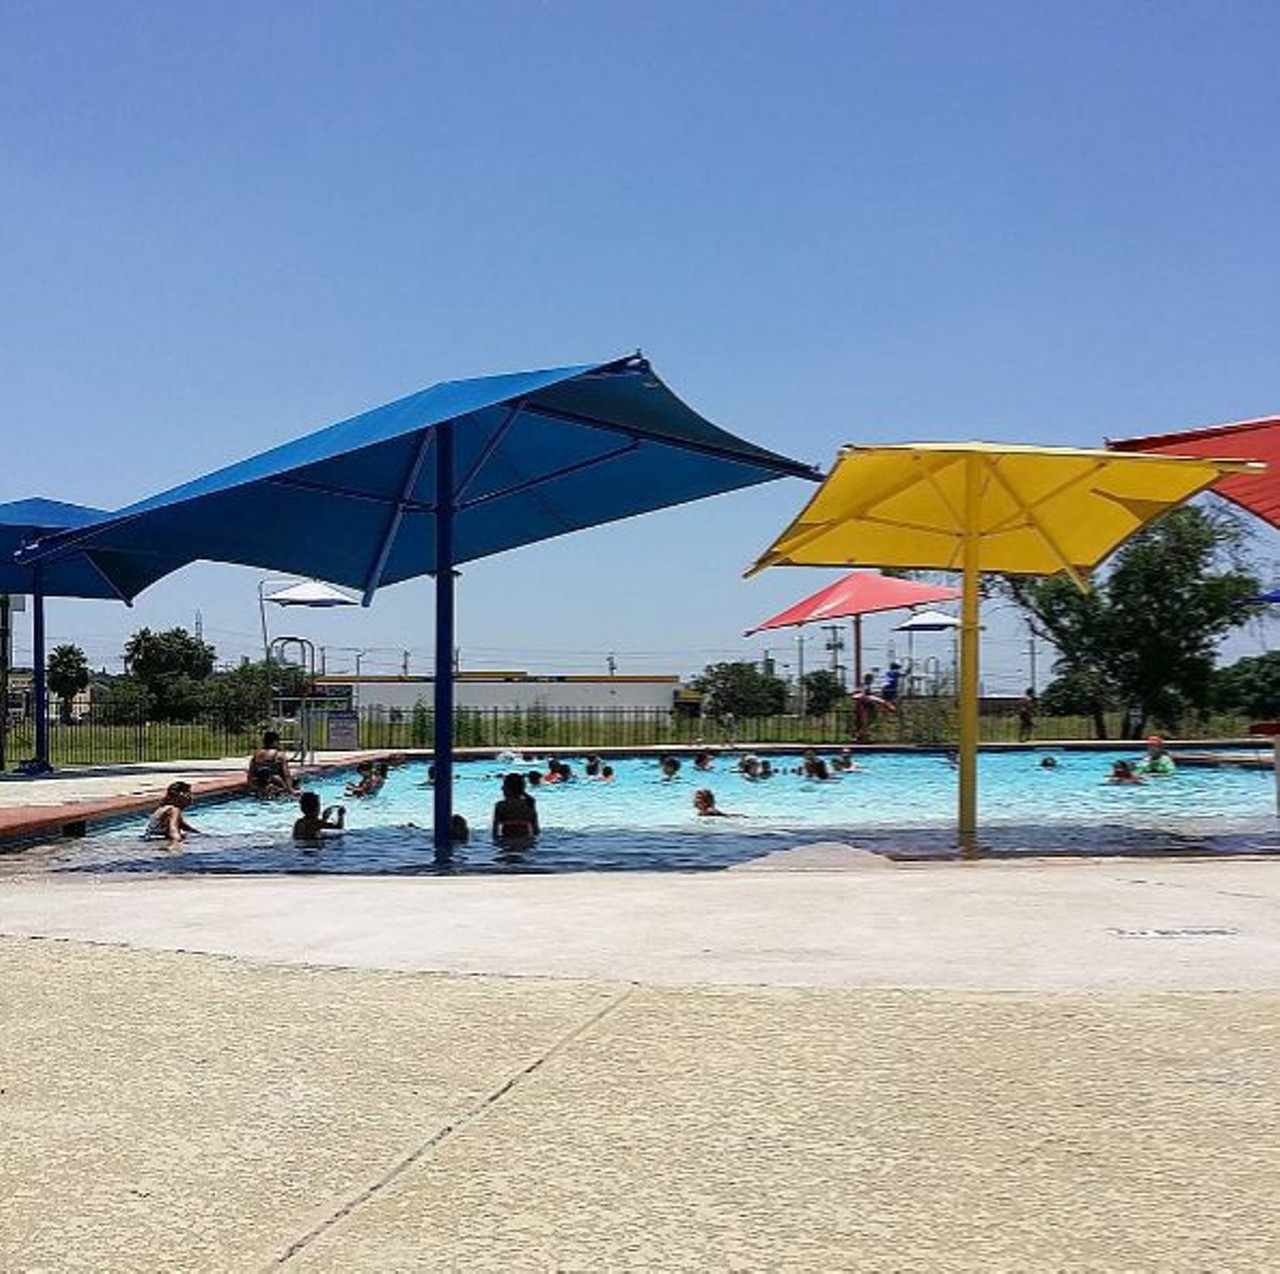 Heritage pool
1423 S. Ellison Dr., (210) 645-9465, Open swim: 1-7 pm, Tues-Sun
Heritage is a great place to work on your pool-side relaxation skills. In fact, go ahead and list that skill on your resume so everyone can know you&#146;re the best at relaxing. 
Photo via Instagram, san_antonio_foodjunkie